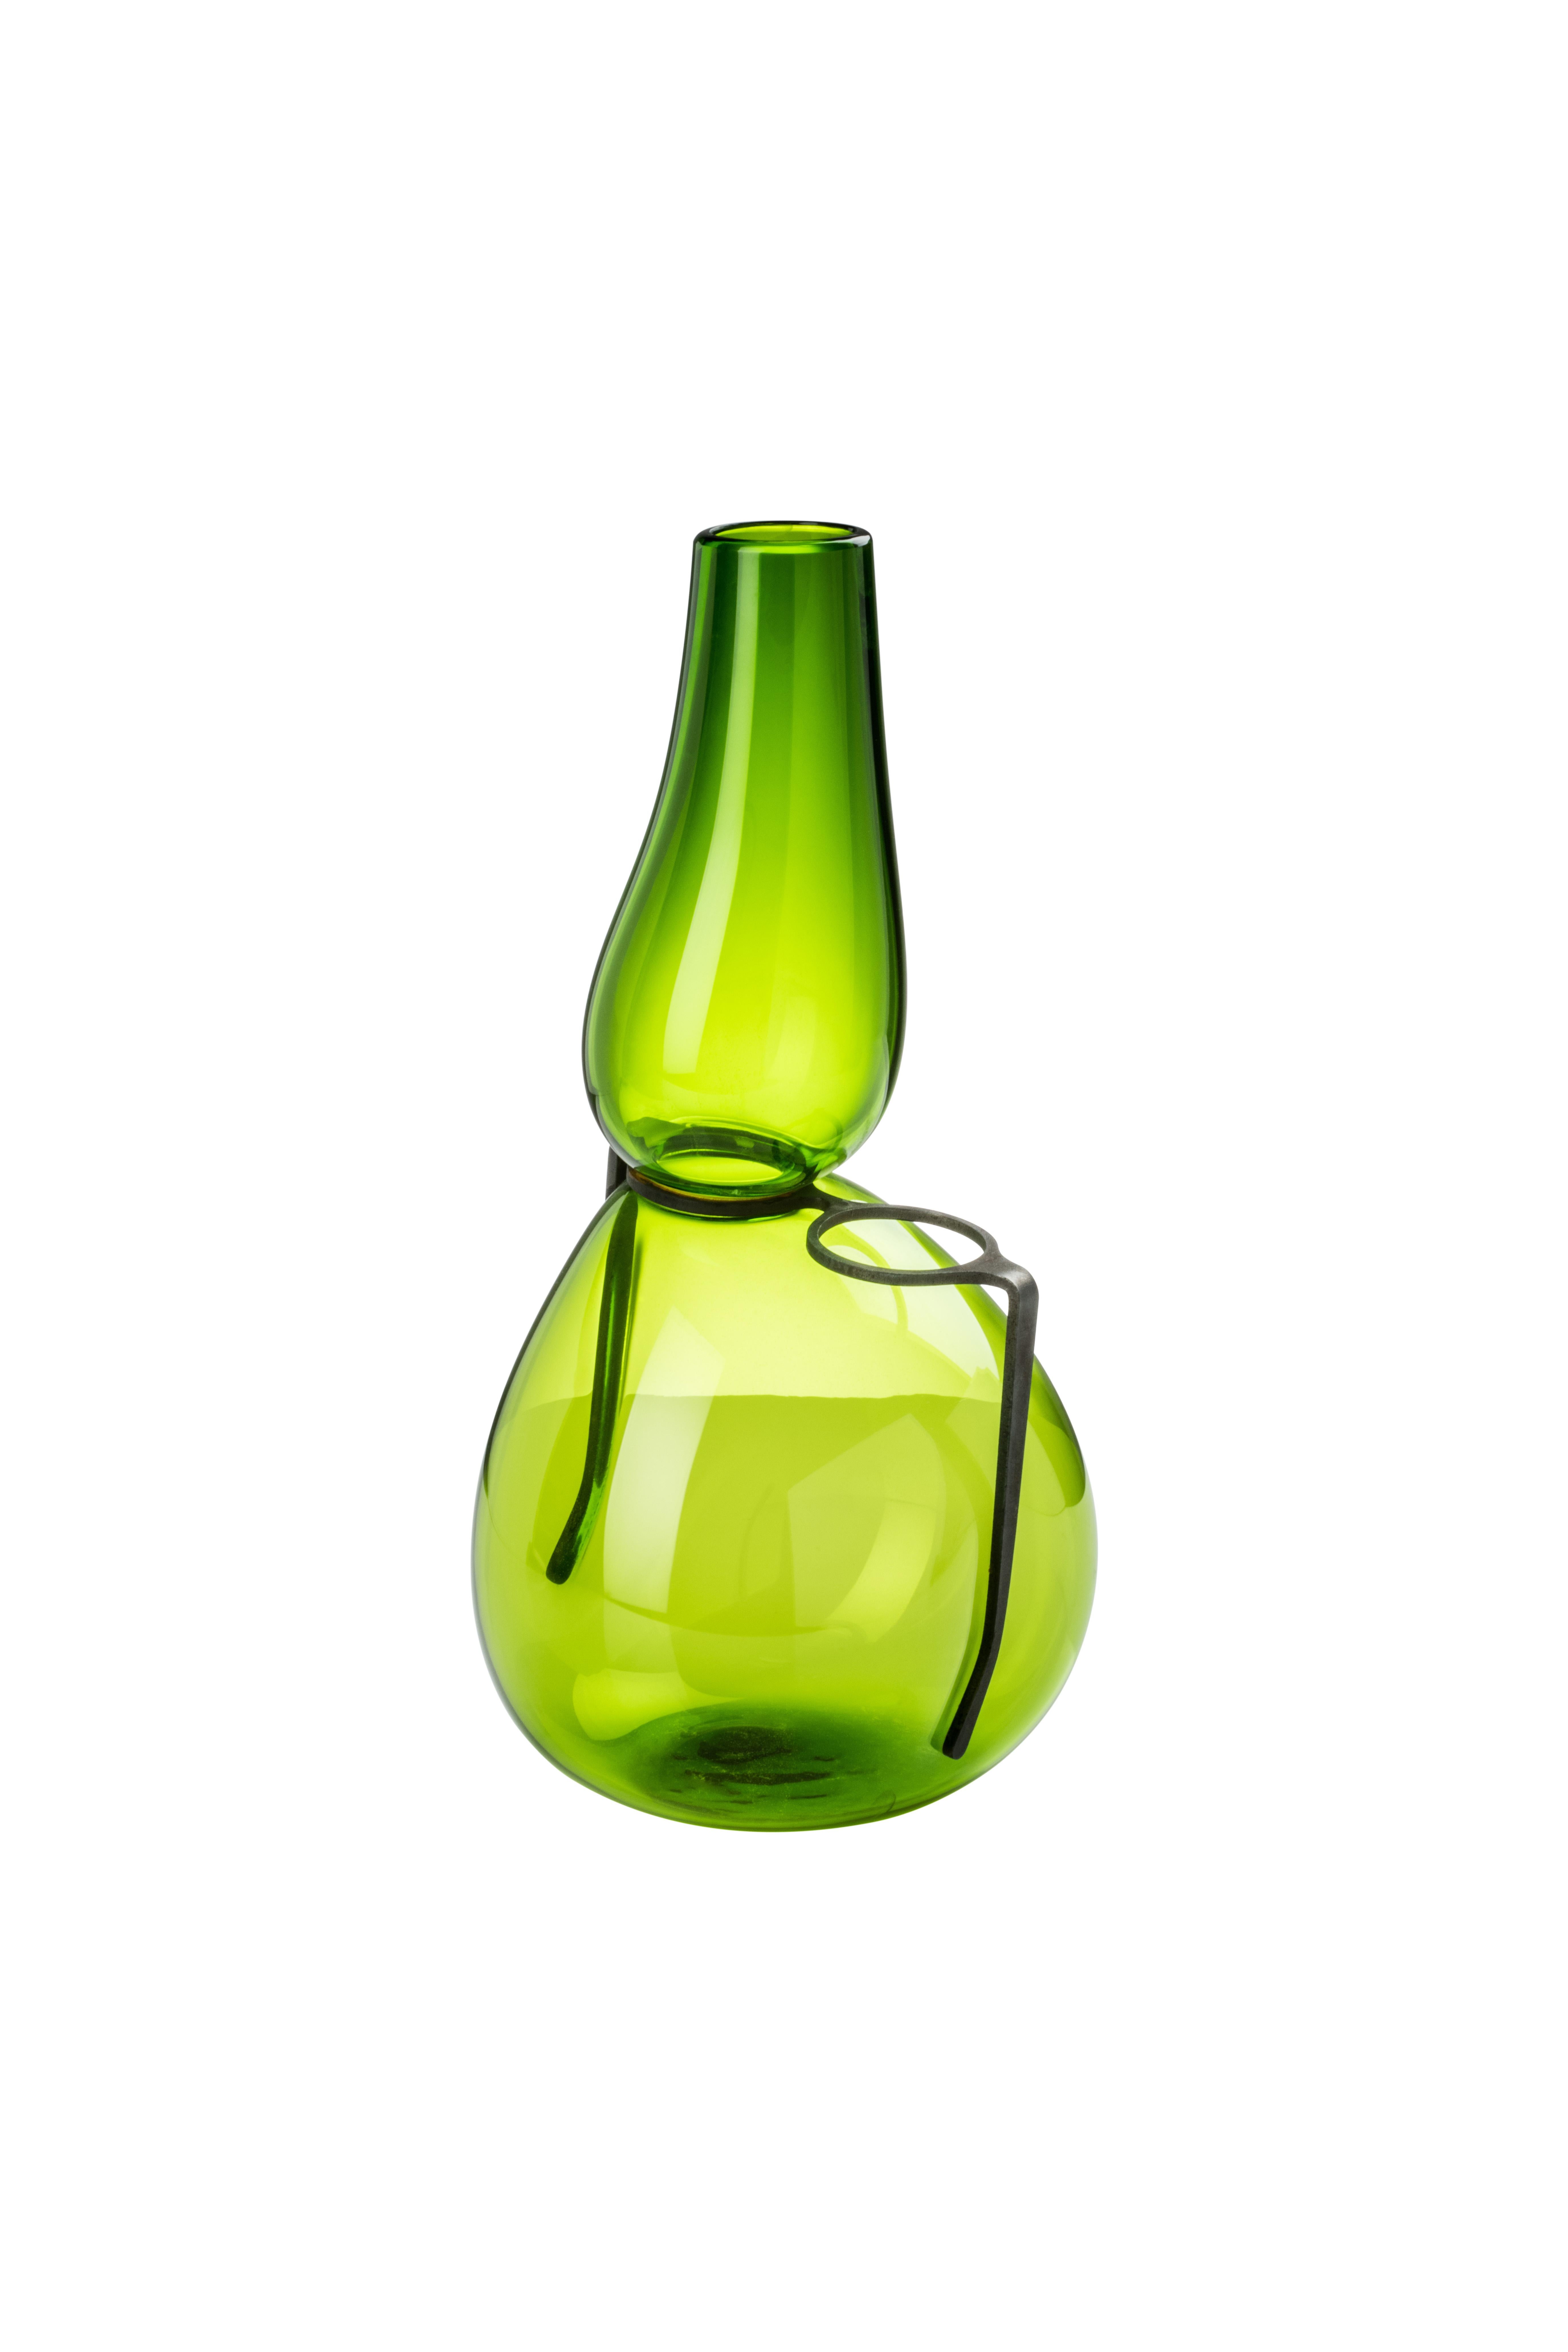 Venini glass vase with slim shaped neck and black glass glasses sculpture. Featured in grass green colored glass. Perfect for indoor home decor as container or strong statement piece for any room.

Dimensions: 25 cm diameter x cm height.